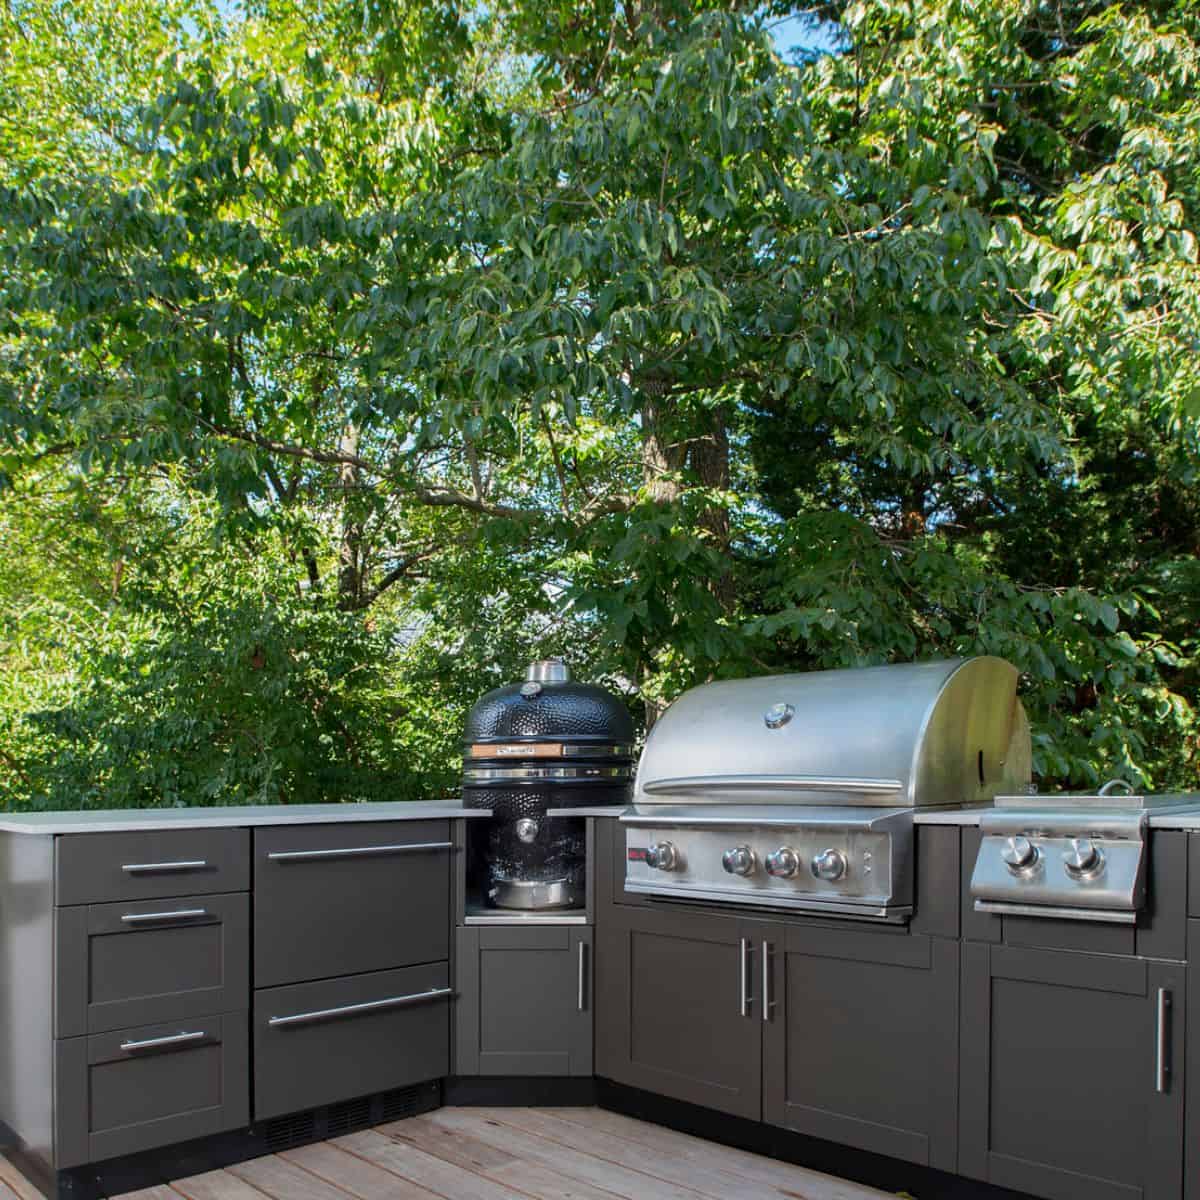 Blaze Grill in Outdoor Kitchen. Designed by Design Builders MD